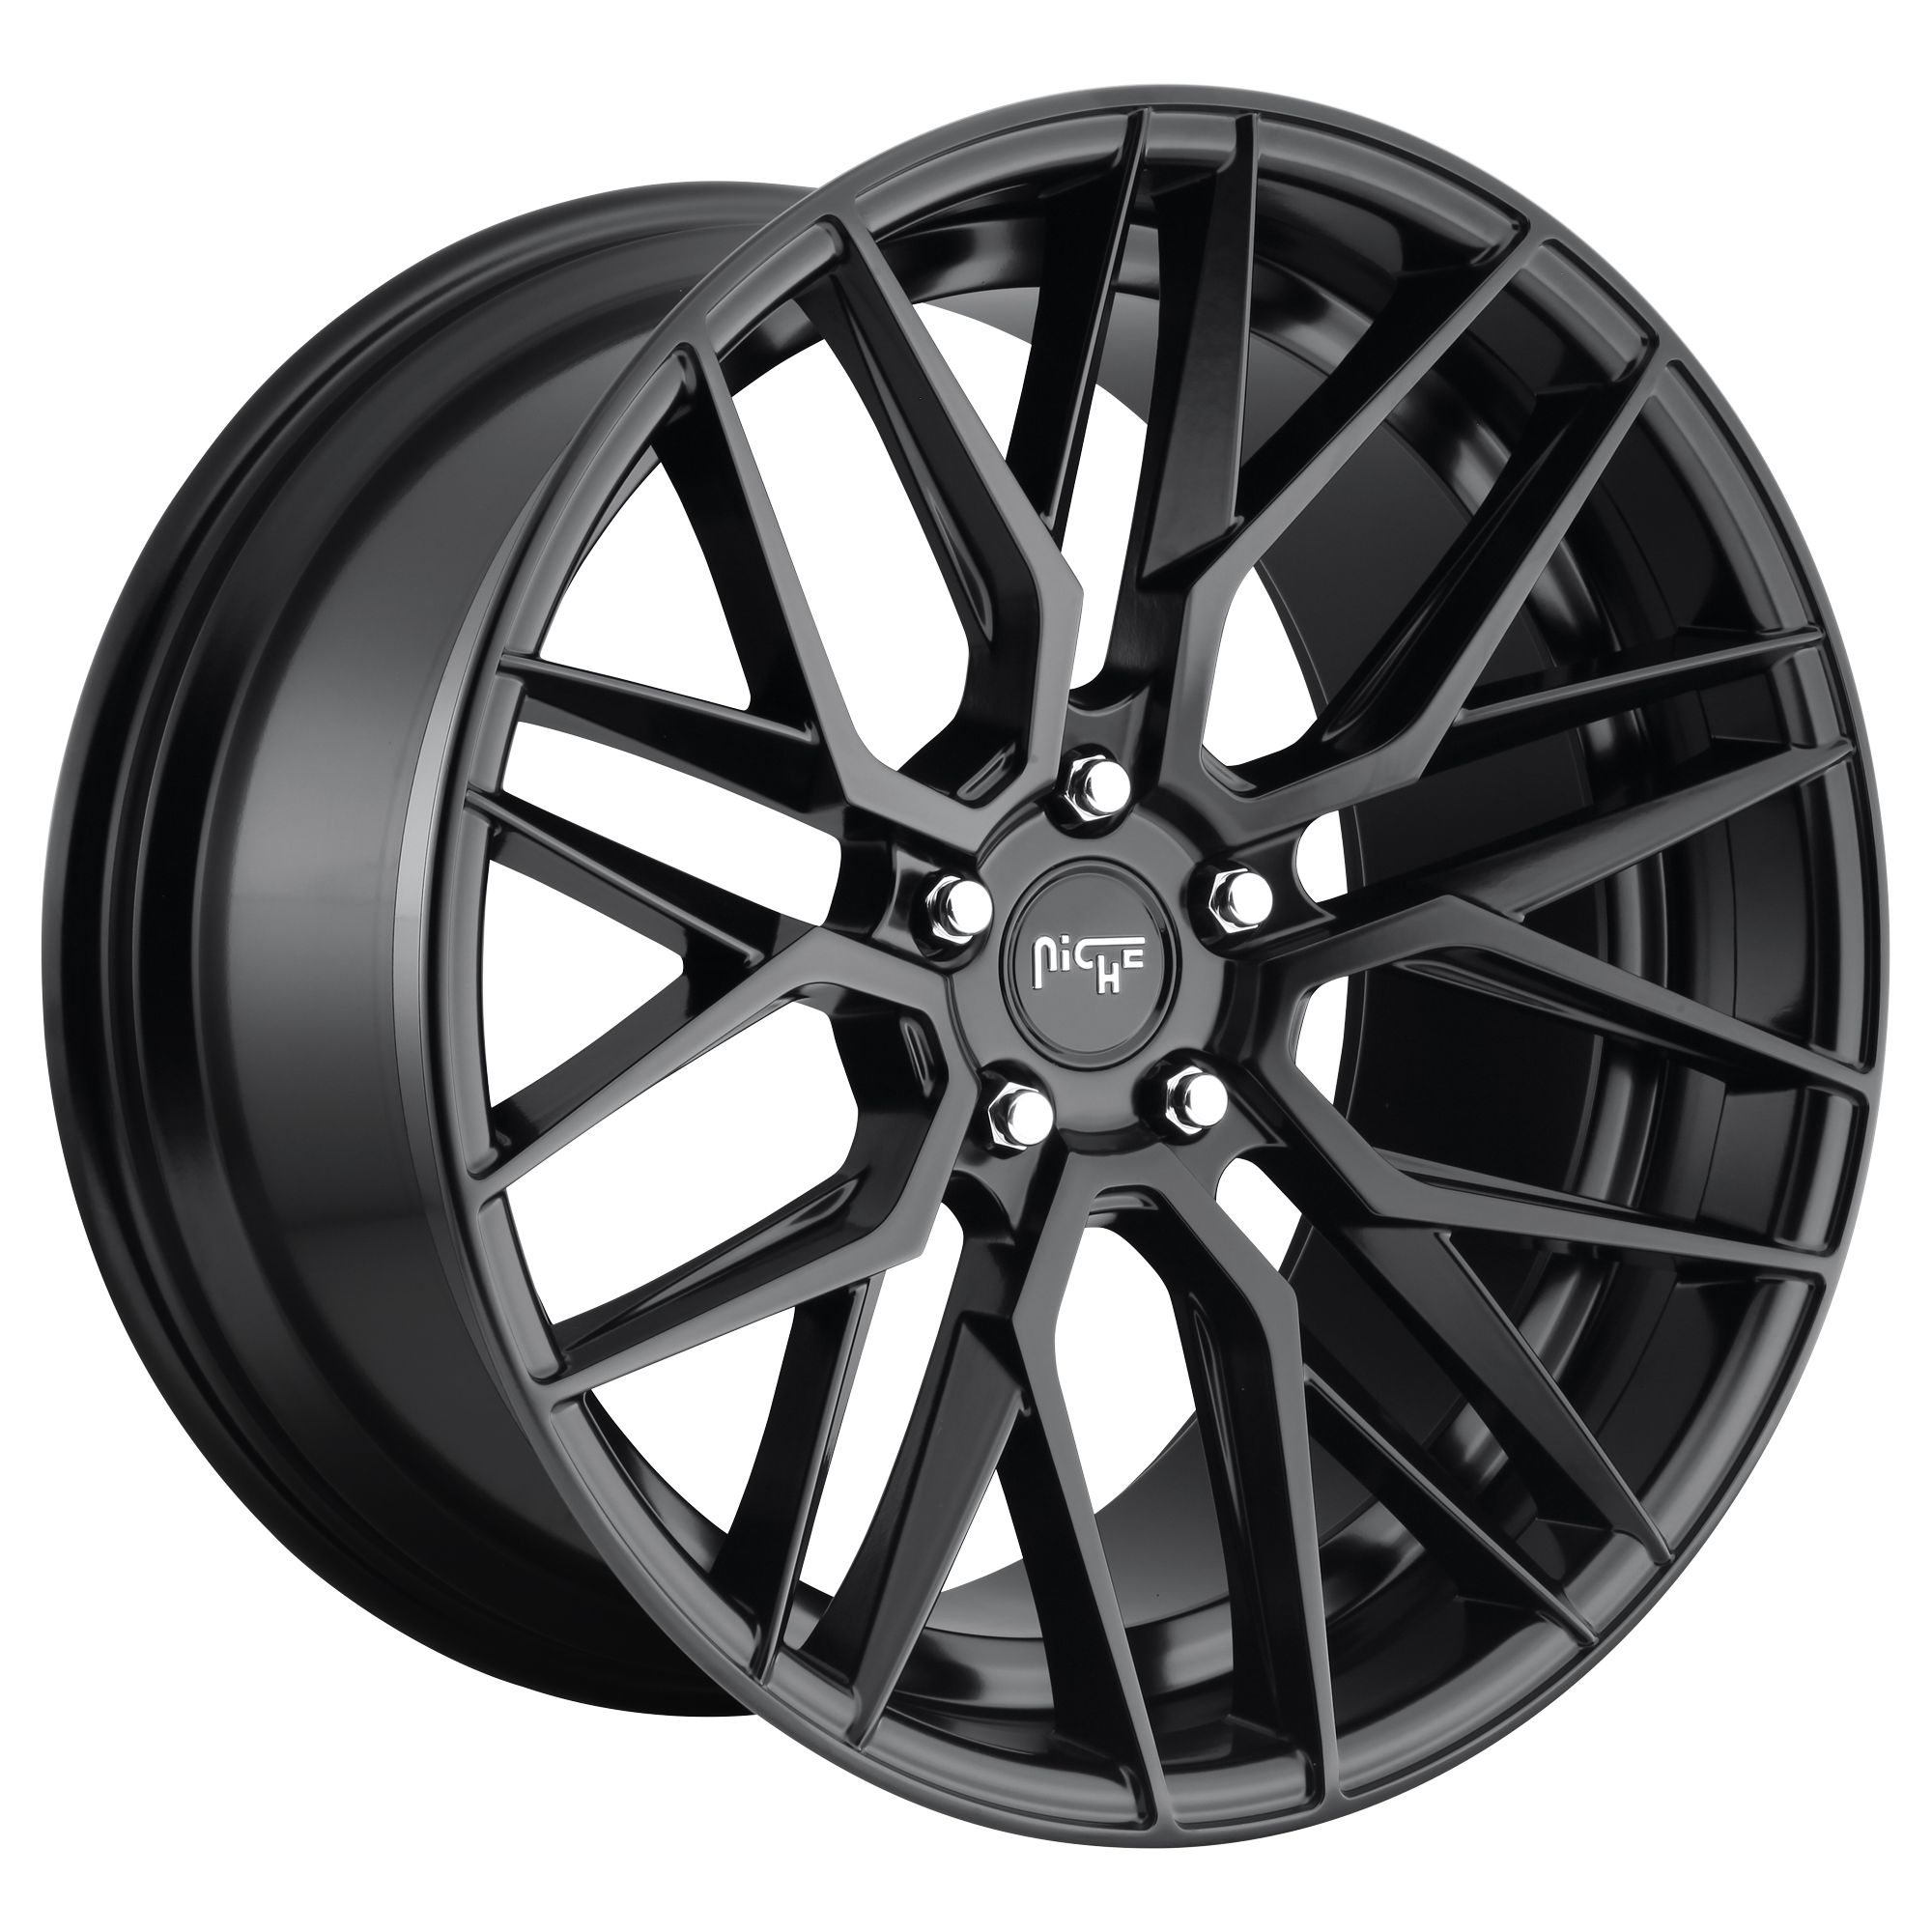 GAMMA 19x9.5 5x112.00 MATTE BLACK (48 mm) - Tires and Engine Performance